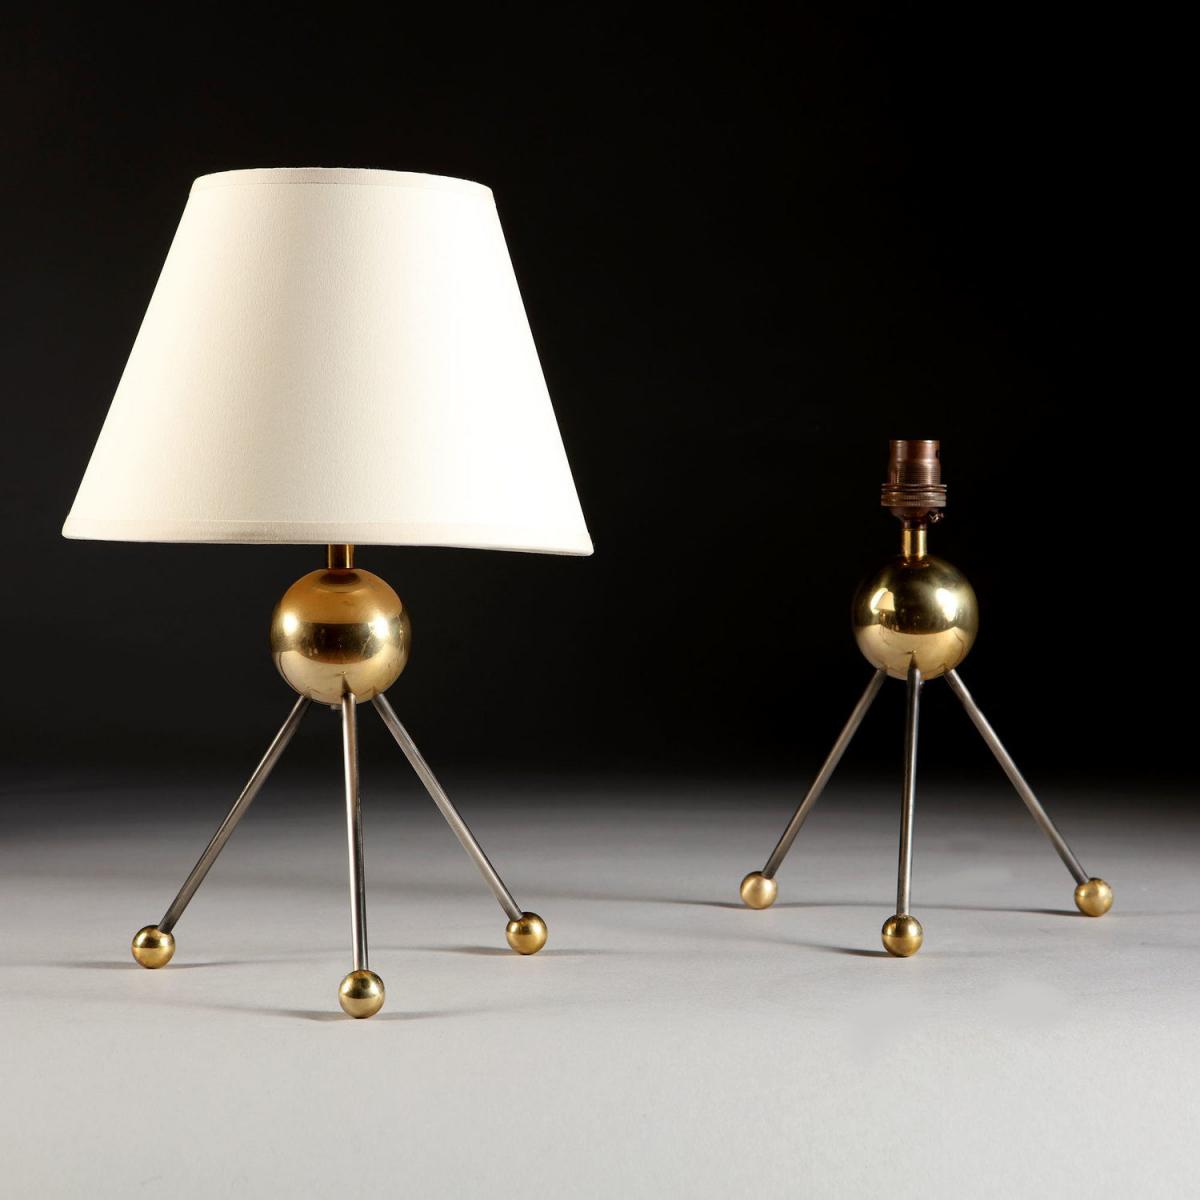 A Pair of Steel and Brass Sputnik Lamps